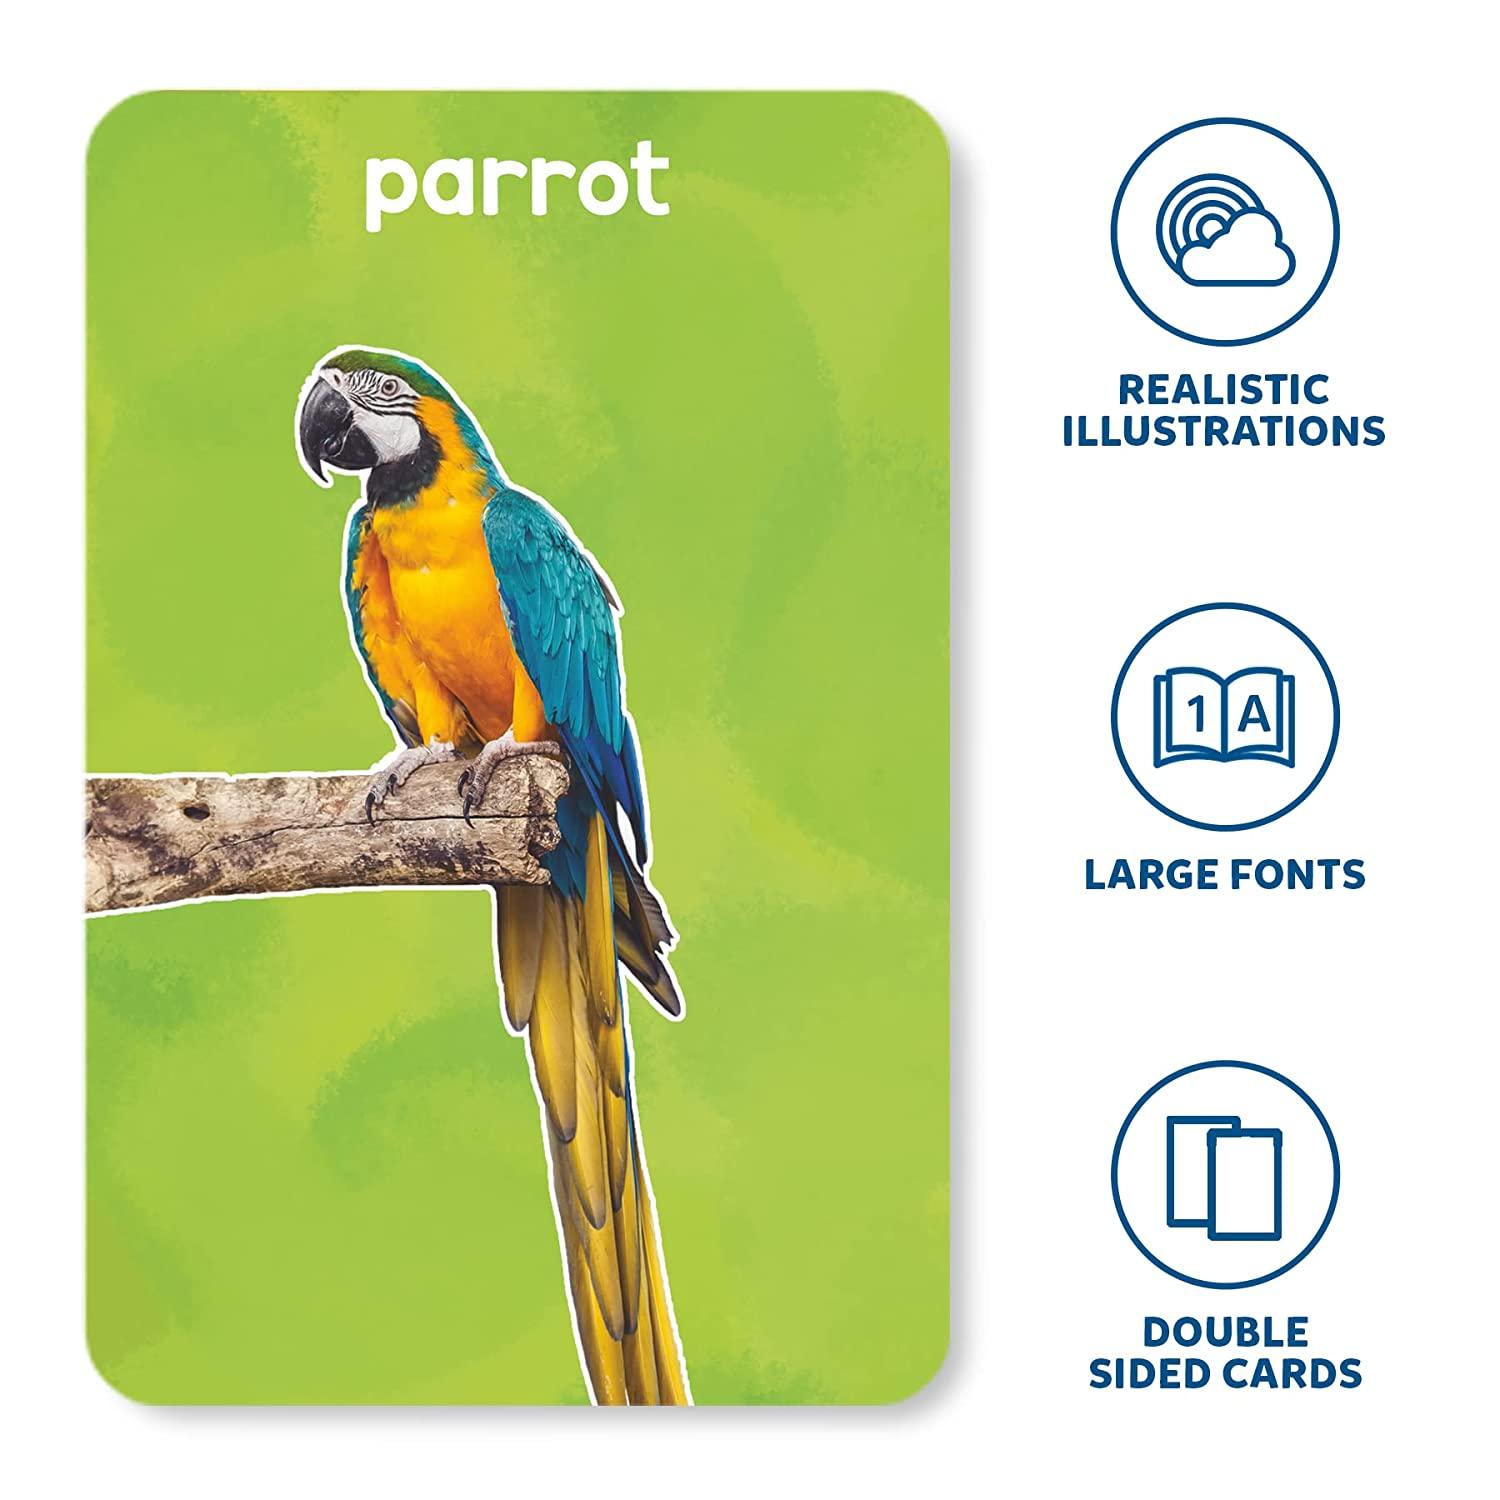 Skillmatics First 100 Animals - 3 in 1 Educational Flash Cards for Ages 2+ - FunCorp India